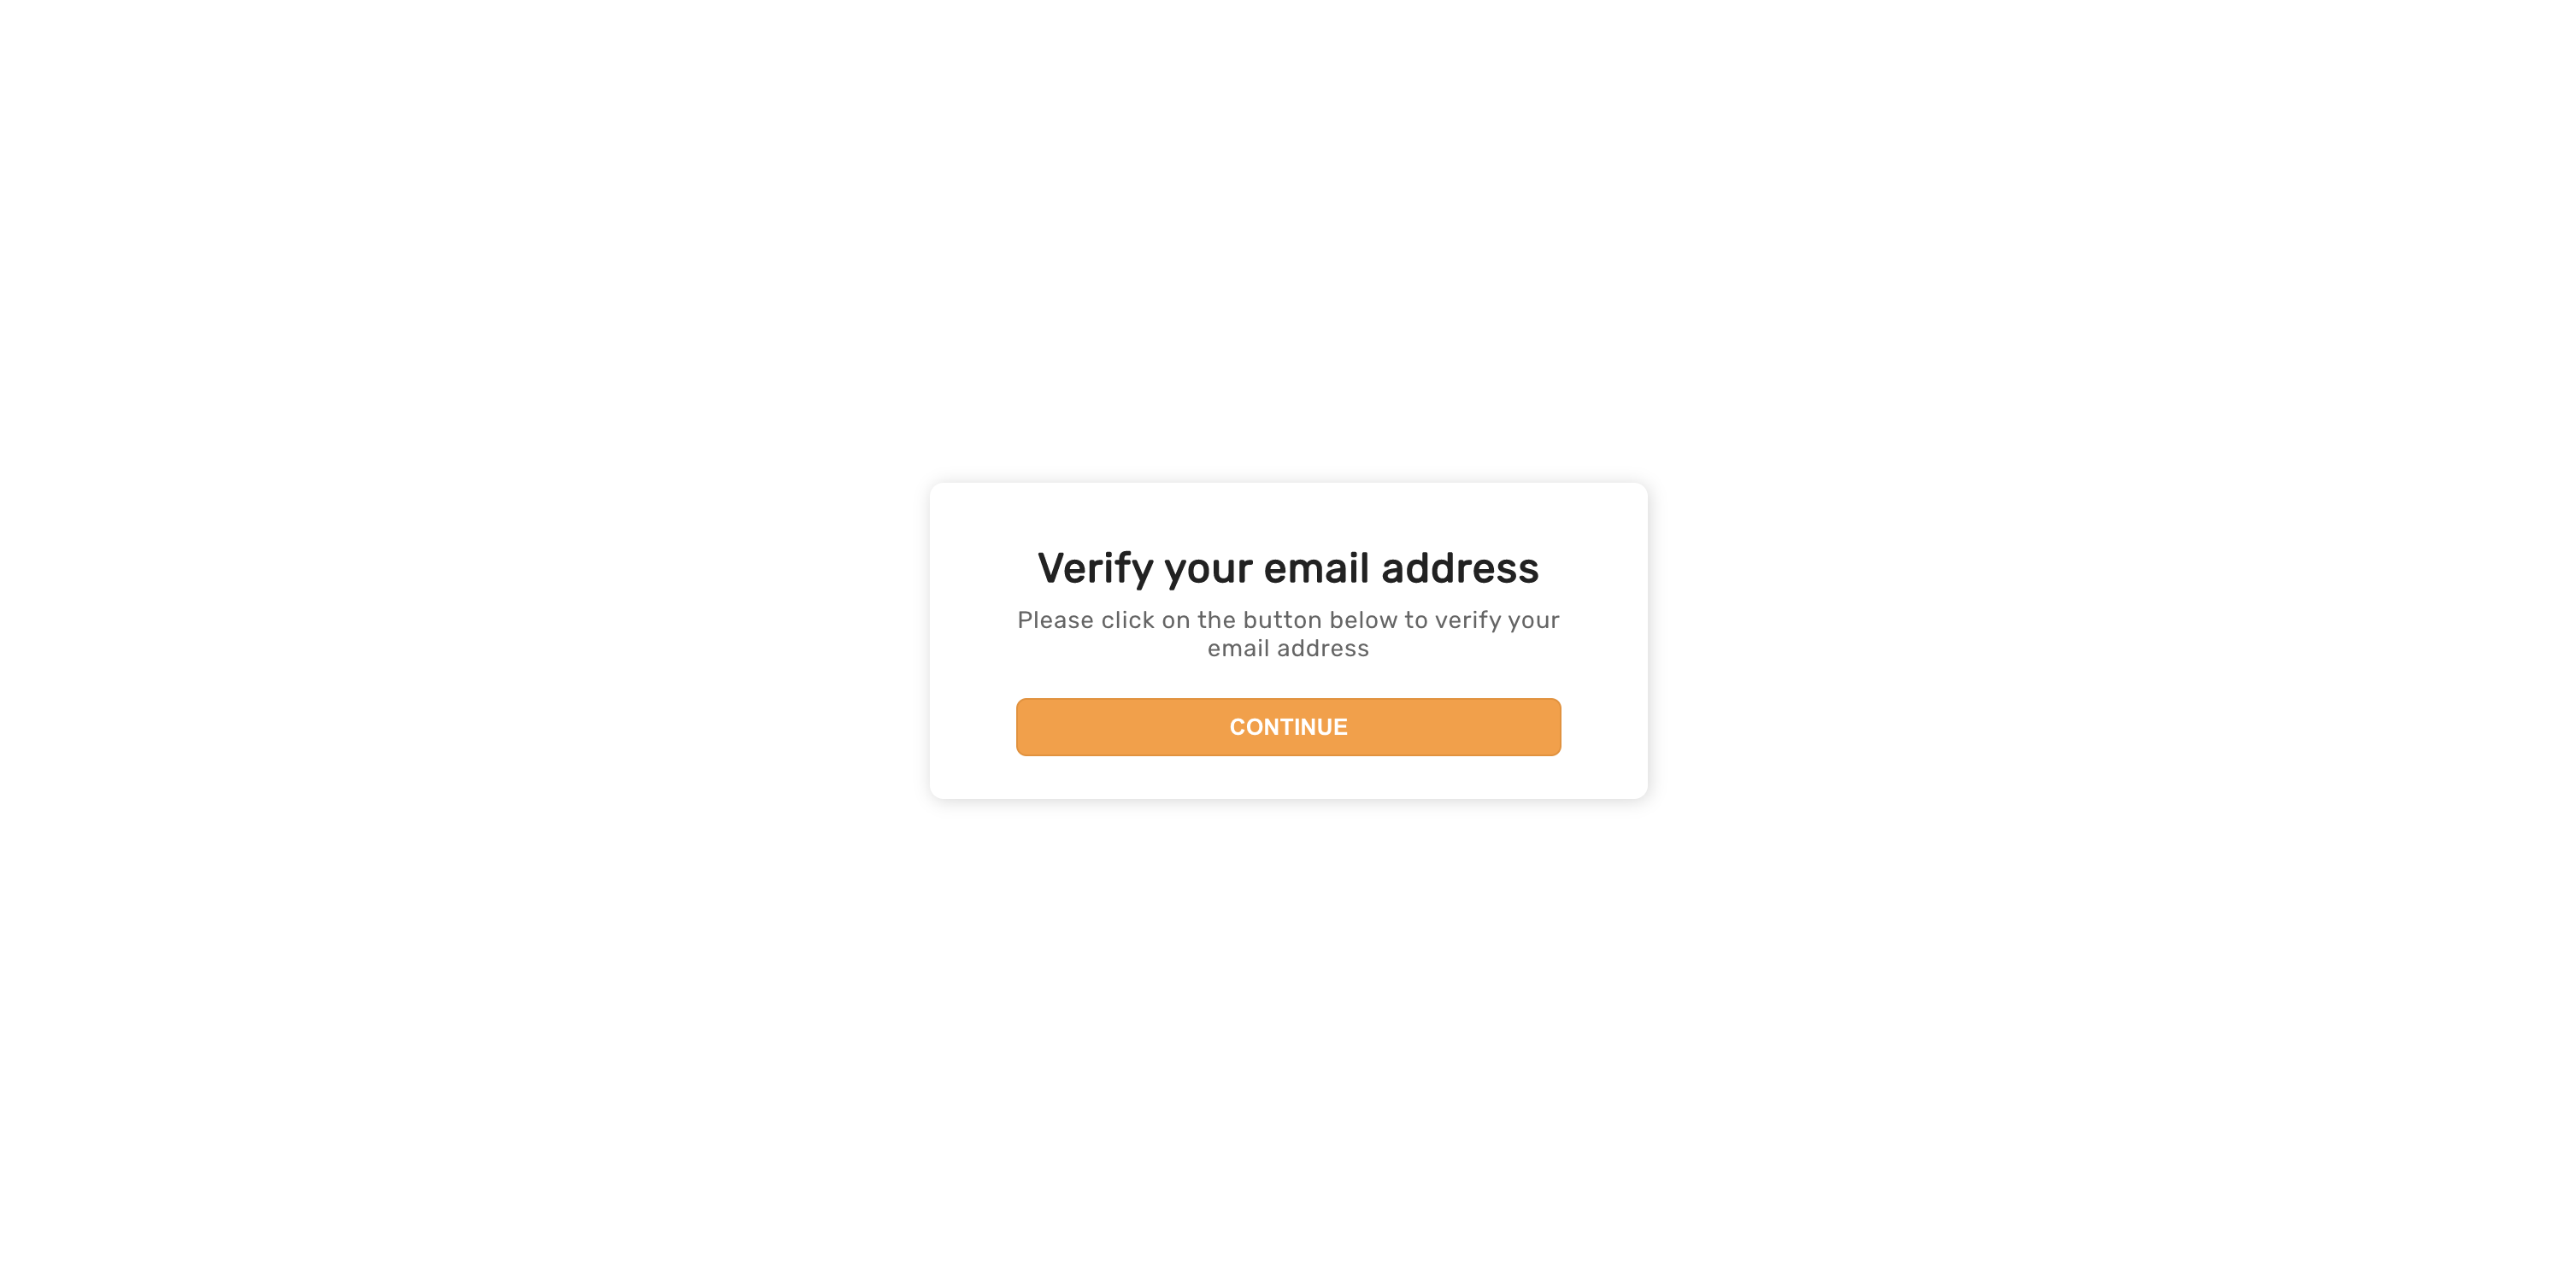 Email verification no session prompt